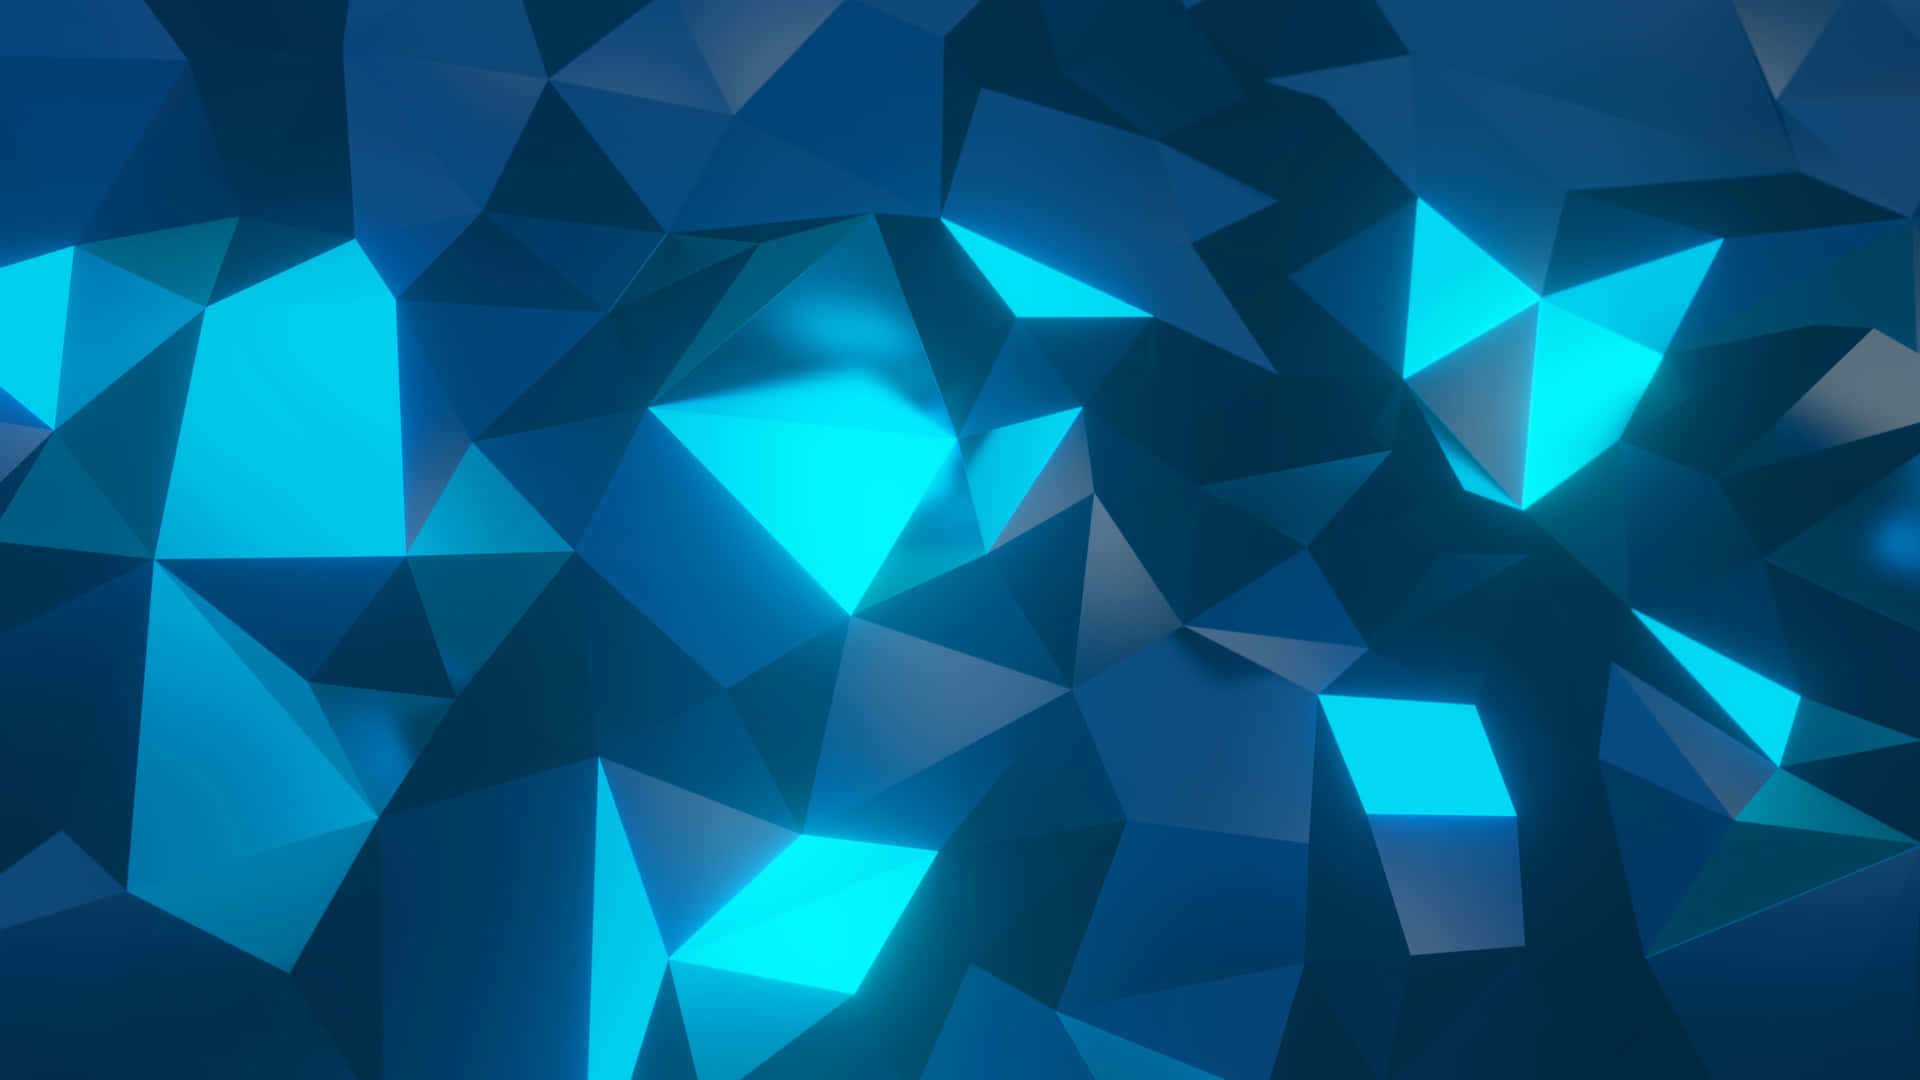 A blue abstract background - Low poly